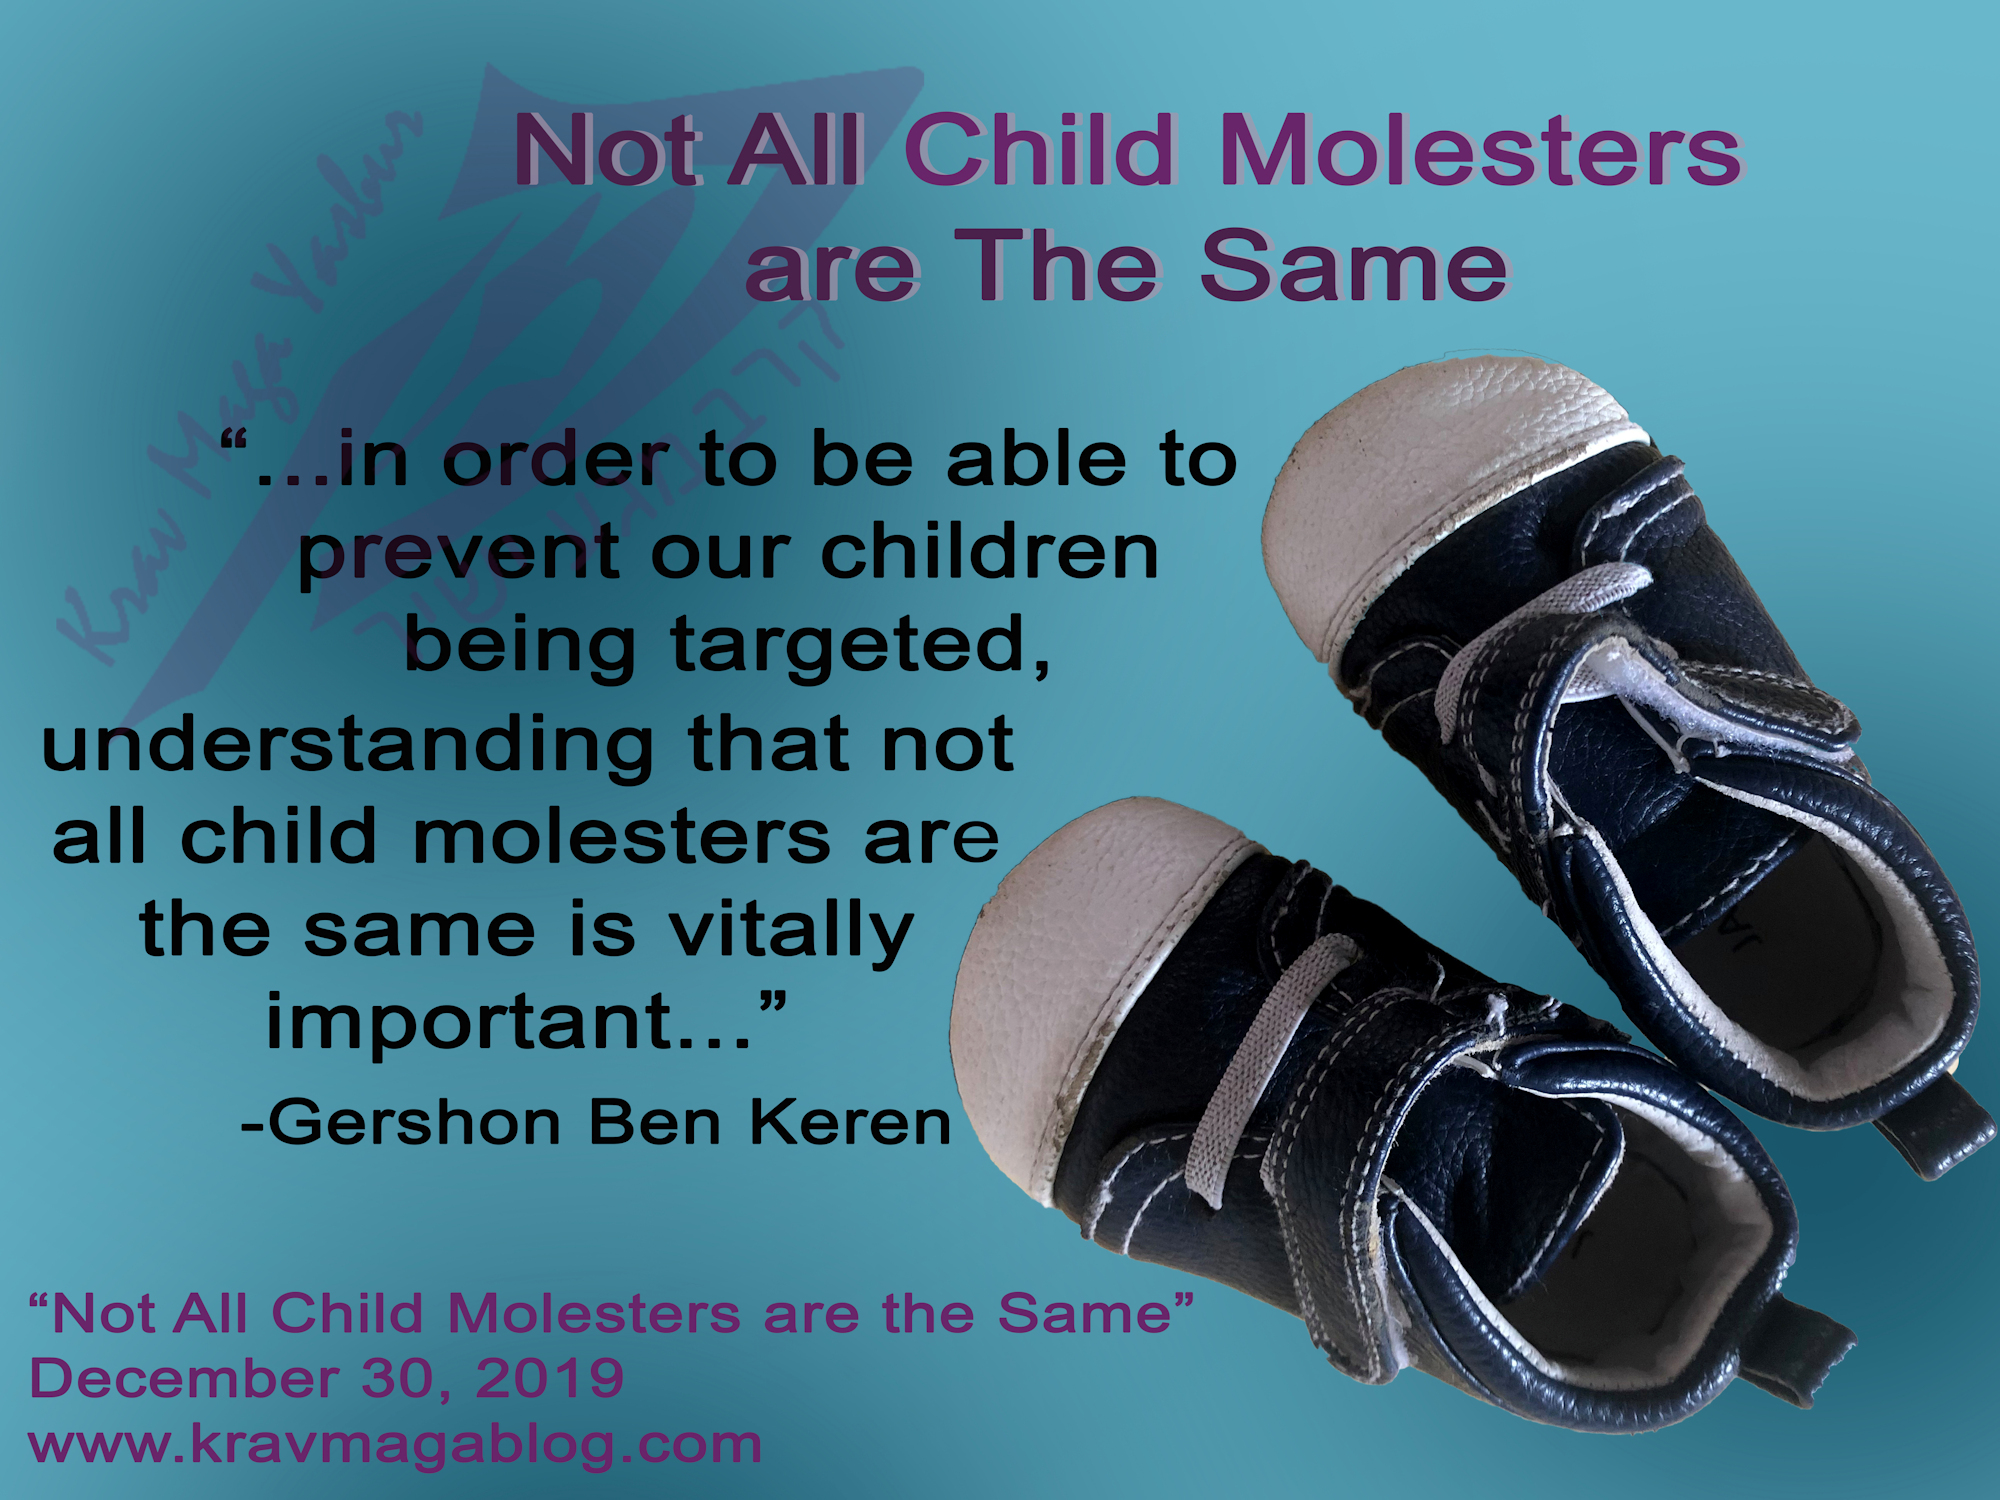 Blog About Not All Child Molesters Are The Same